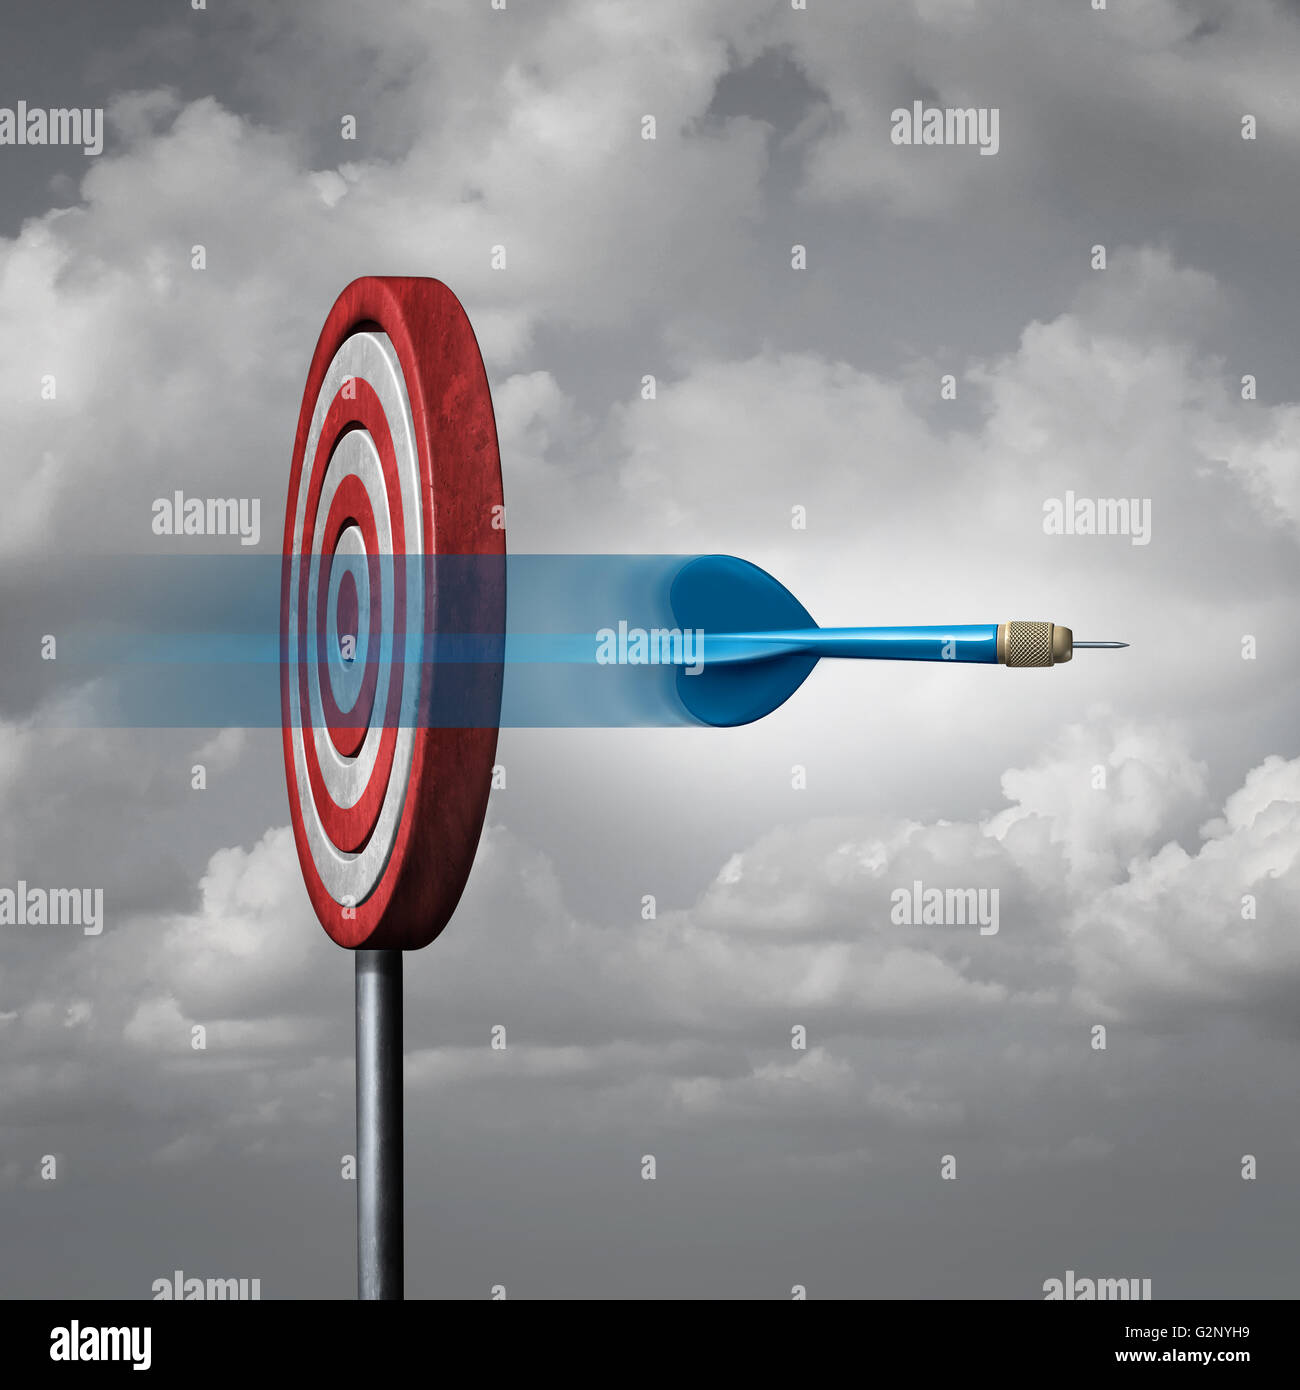 Missing the target concept as a dart way off the mark or bullseye as a metaphor for failure and failing to hit a goal with 3D illustration elements. Stock Photo